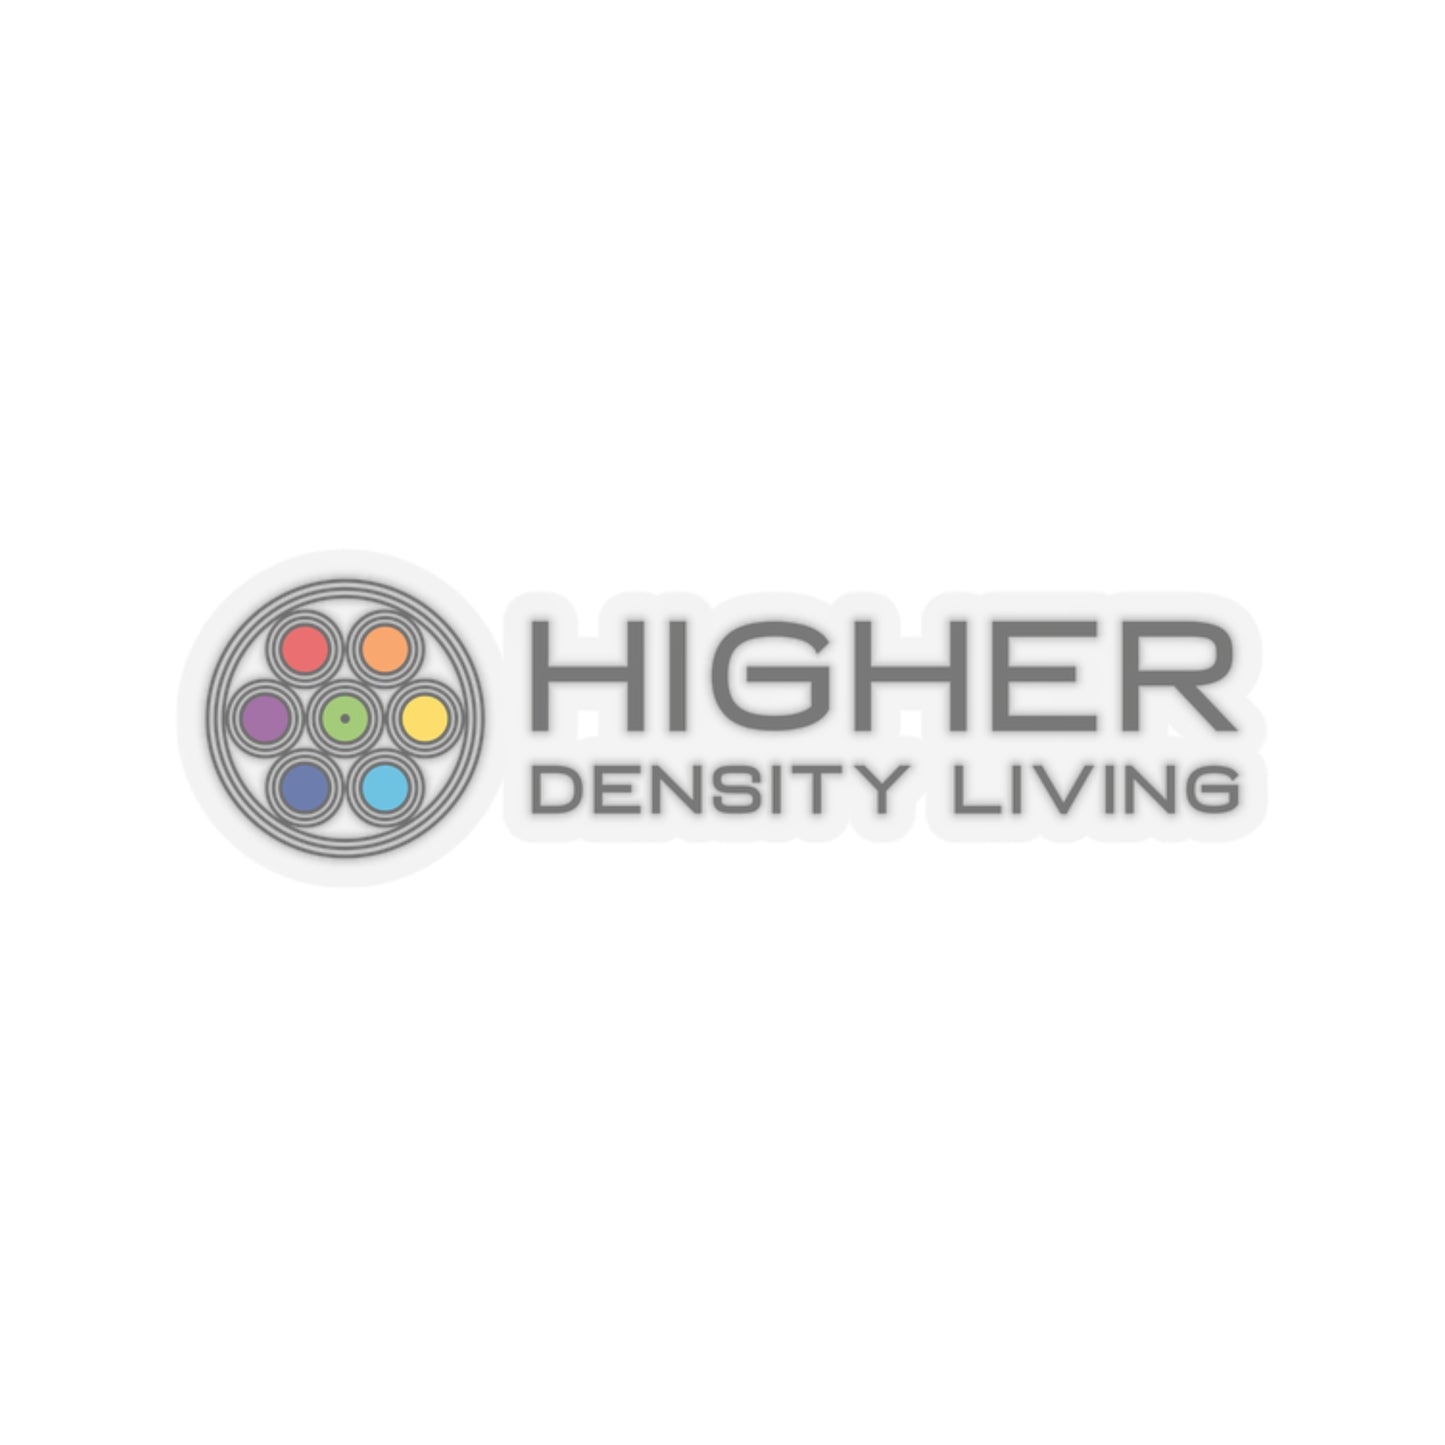 HDL Stickers: Wearable Wisdom from the Higher Density Living Podcast